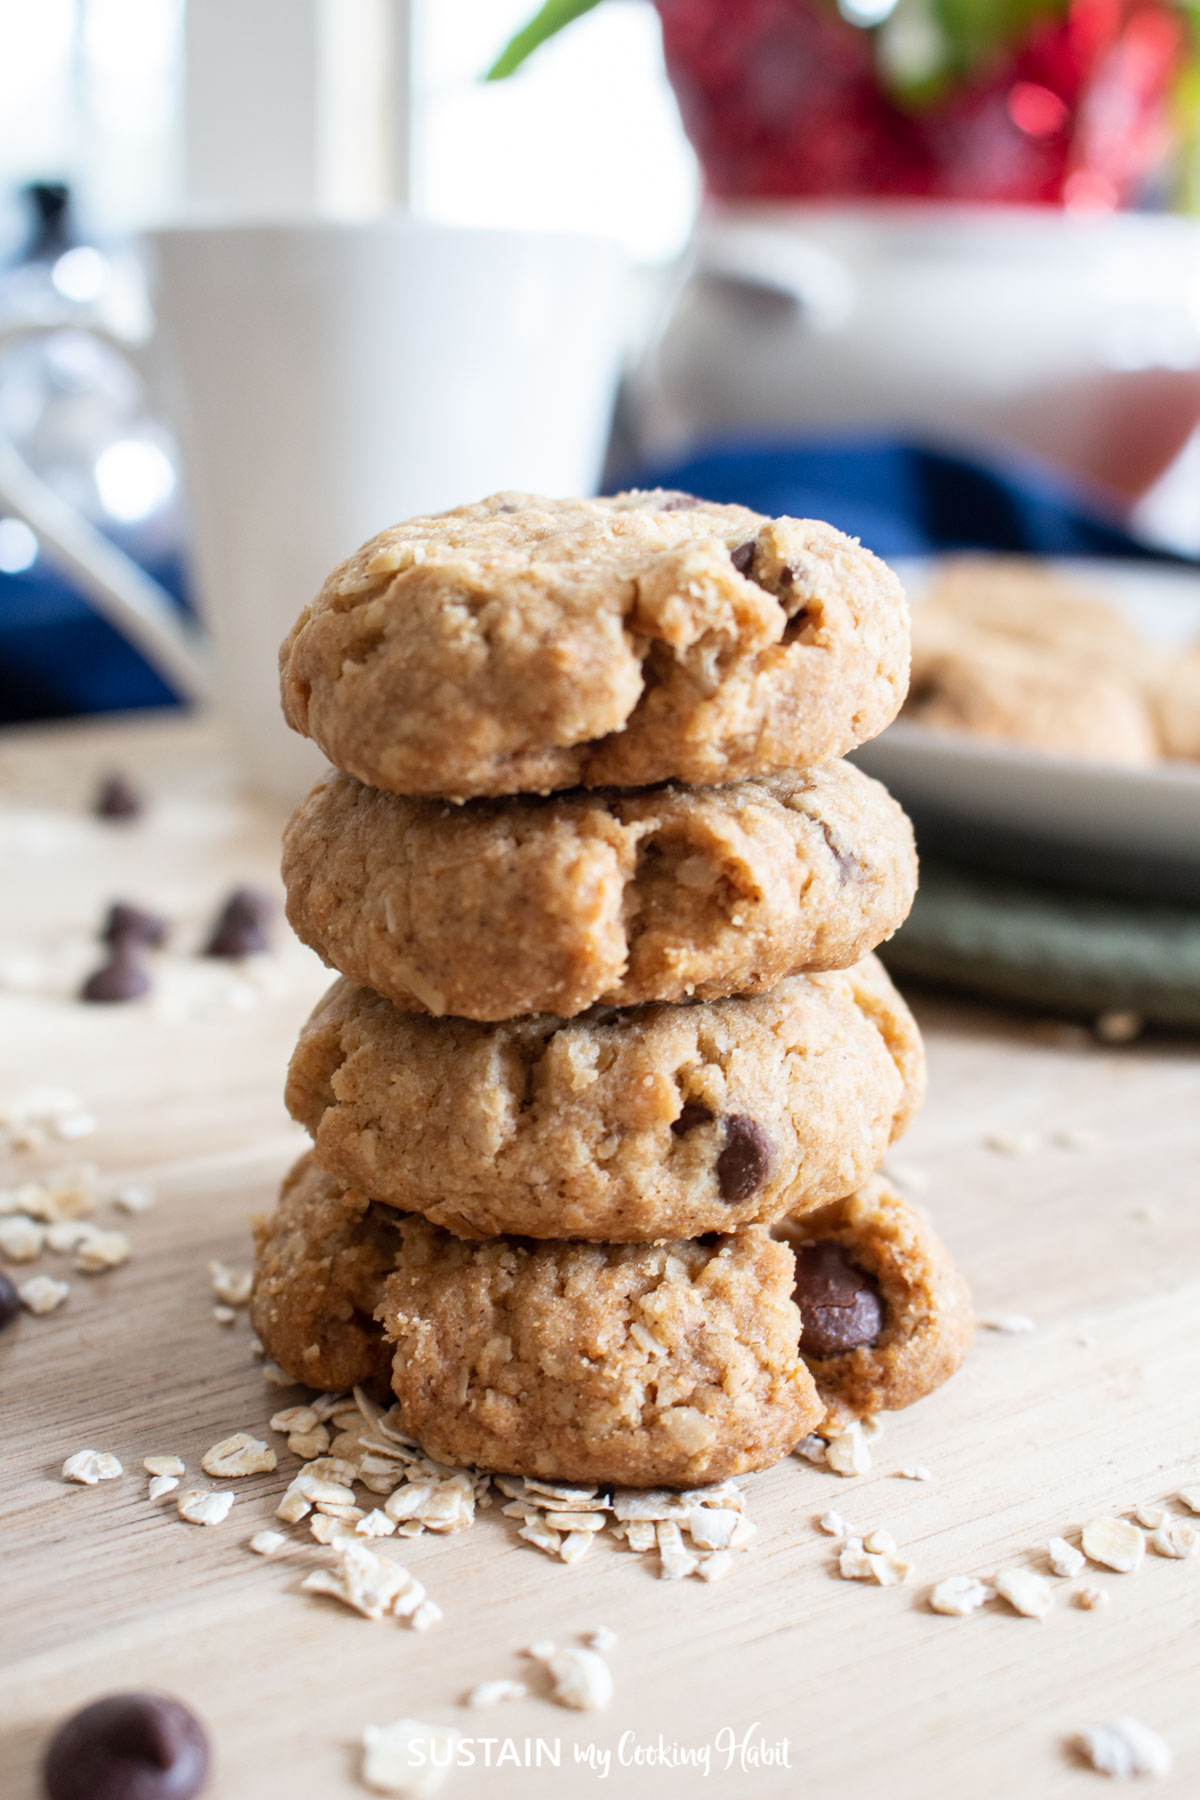 Old fashioned oatmeal chocolate chip cookies stacked together.